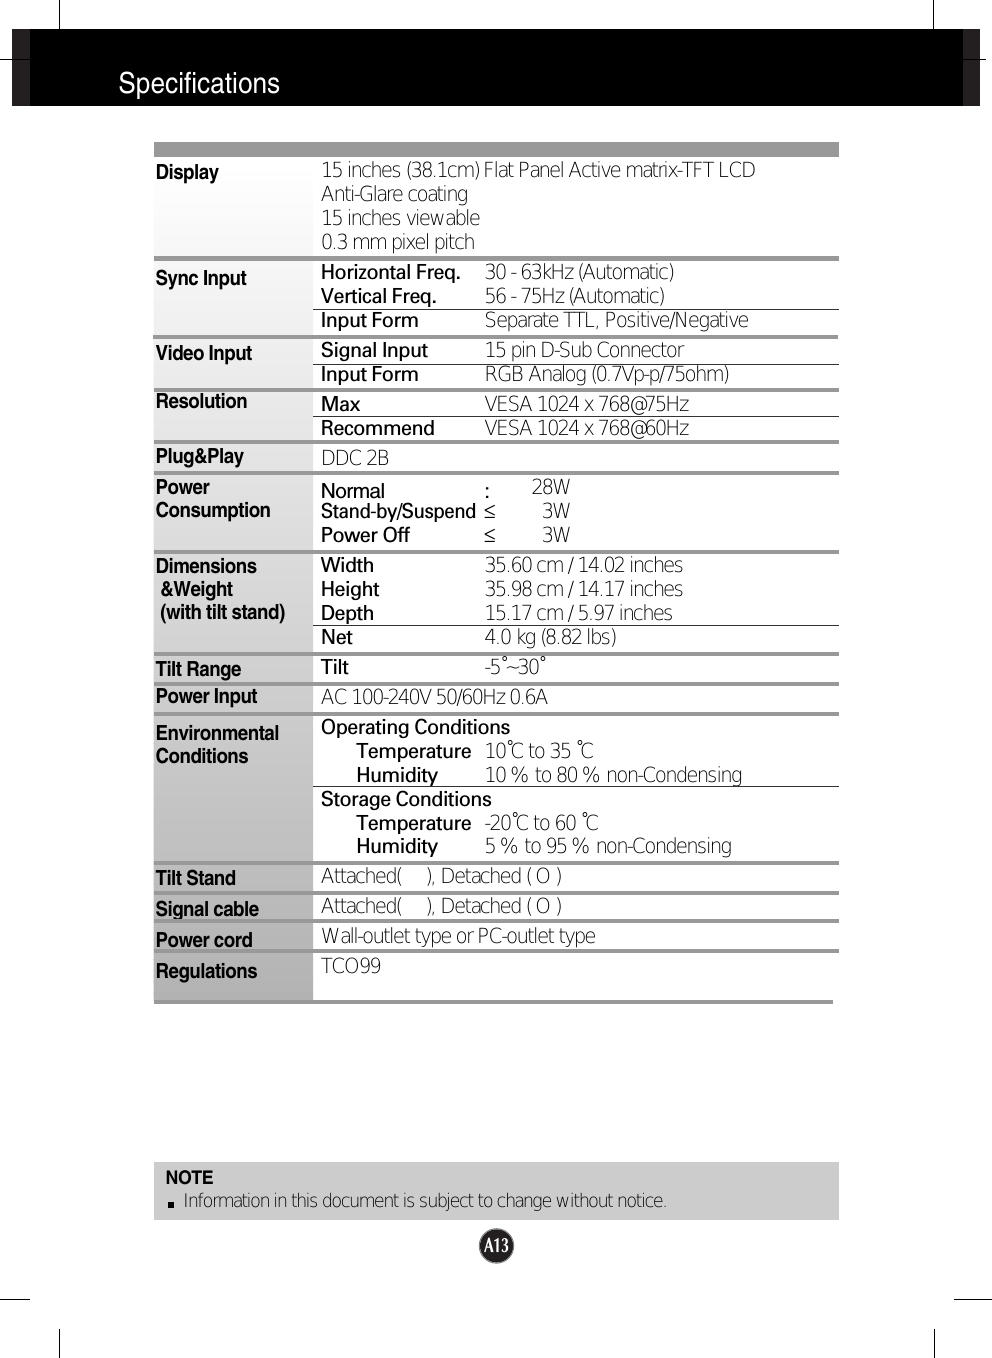 A13SpecificationsNOTEInformation in this document is subject to change without notice.15 inches (38.1cm) Flat Panel Active matrix-TFT LCD Anti-Glare coating15 inches viewable0.3 mm pixel pitchHorizontal Freq. 30 - 63kHz (Automatic)Vertical Freq. 56 - 75Hz (Automatic)Input Form Separate TTL, Positive/NegativeSignal Input 15 pin D-Sub ConnectorInput Form RGB Analog (0.7Vp-p/75ohm)Max VESA 1024 x 768@75Hz Recommend VESA 1024 x 768@60HzDDC 2BNormal :28WStand-by/Suspend≤3WPower Off ≤3WWidth 35.60 cm / 14.02 inchesHeight 35.98 cm / 14.17 inchesDepth 15.17 cm / 5.97 inchesNet 4.0 kg (8.82 lbs)Tilt -5˚~30˚AC 100-240V 50/60Hz 0.6AOperating ConditionsTemperature 10˚C to 35 ˚CHumidity 10 % to 80 % non-CondensingStorage ConditionsTemperature -20˚C to 60 ˚CHumidity 5 % to 95 % non-CondensingAttached(     ), Detached ( O )Attached(     ), Detached ( O )Wall-outlet type or PC-outlet typeTCO99DisplaySync InputVideo InputResolutionPlug&amp;PlayPowerConsumptionDimensions&amp;Weight(with tilt stand)Tilt RangePower InputEnvironmentalConditionsTilt StandSignal cablePower cord Regulations